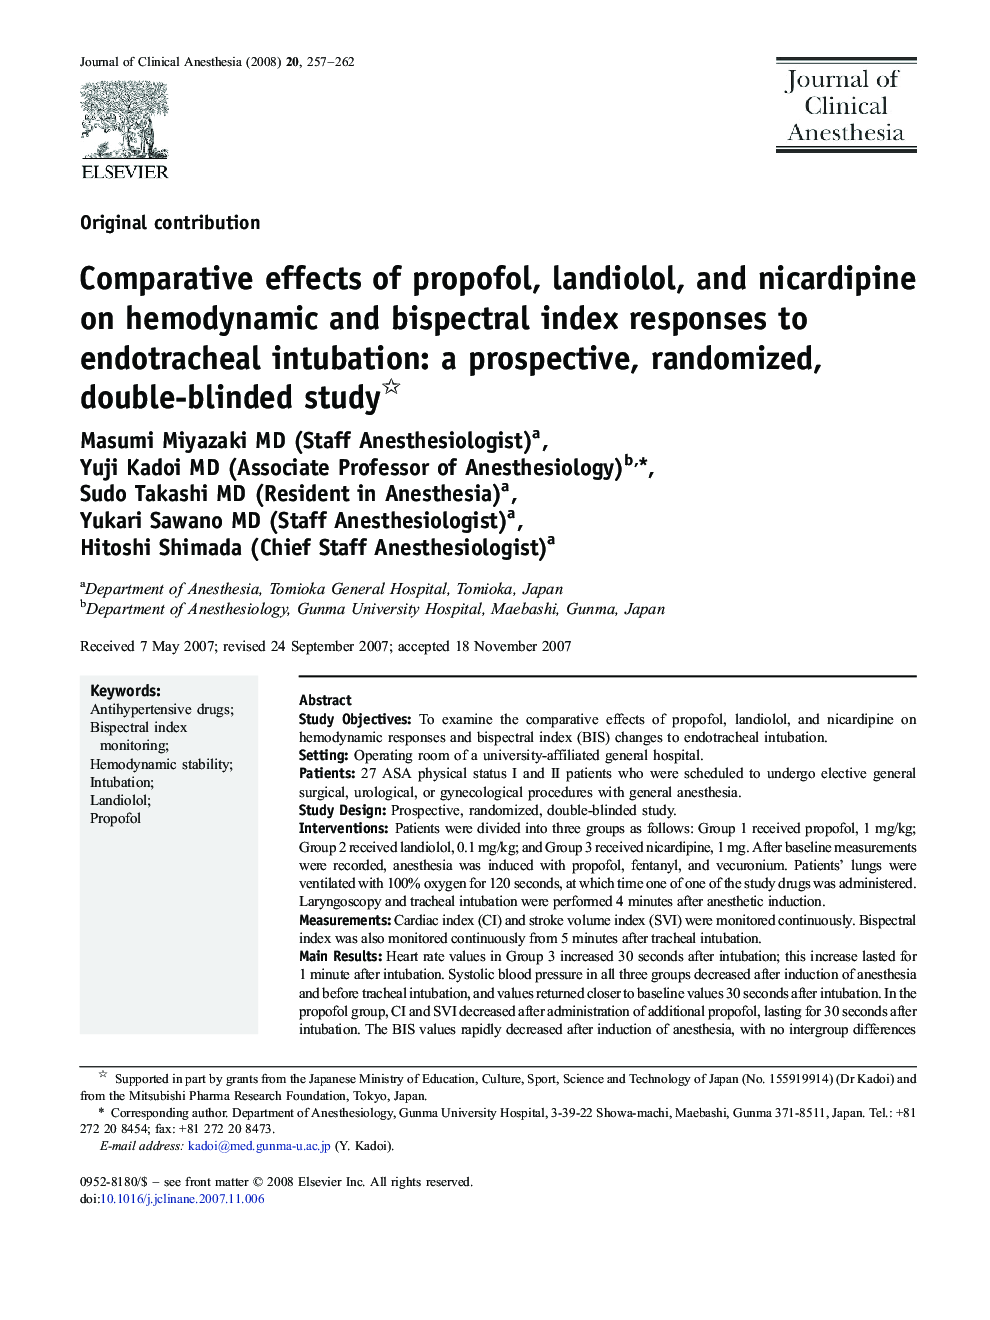 Comparative effects of propofol, landiolol, and nicardipine on hemodynamic and bispectral index responses to endotracheal intubation: a prospective, randomized, double-blinded study 